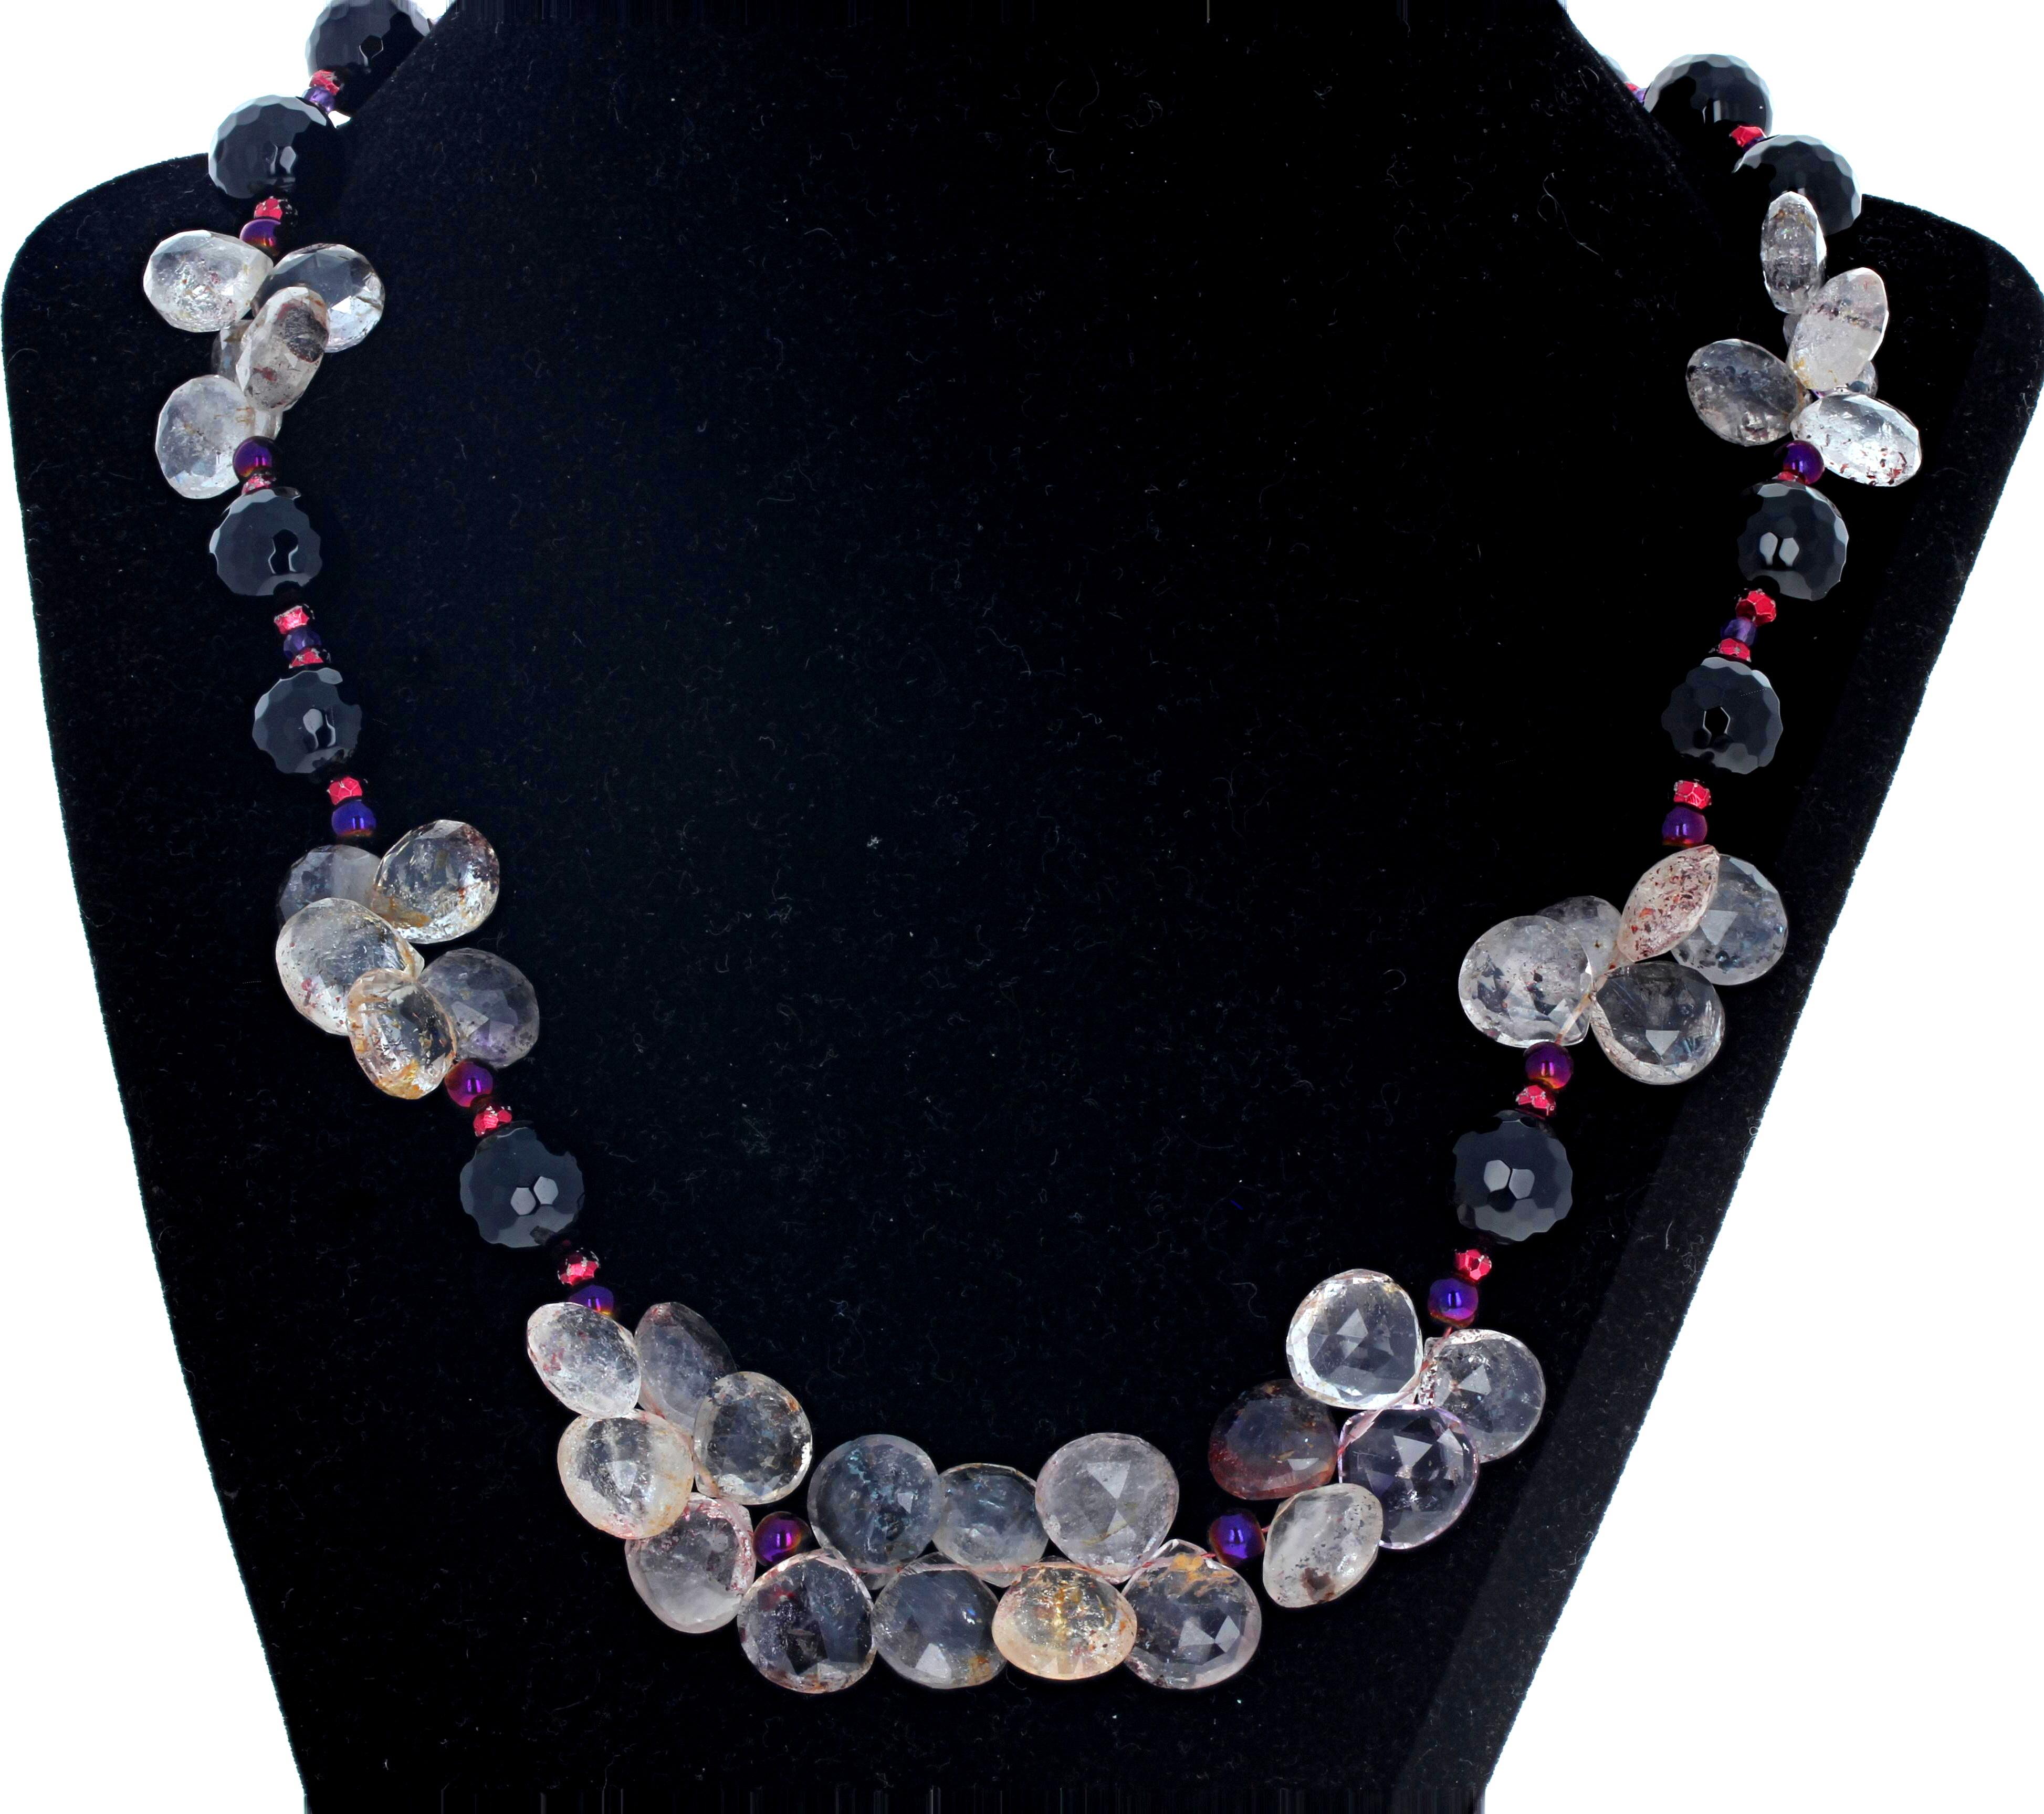 The sparkling natural gem cut Black Onyx (approximately 12mm) enhance the fascinating colors, shapes, and designs of the natural Rutilated Quartz.  The clasp is a silver plated easy to use hook clasp.  This 20 inch long necklace is quite dramatic